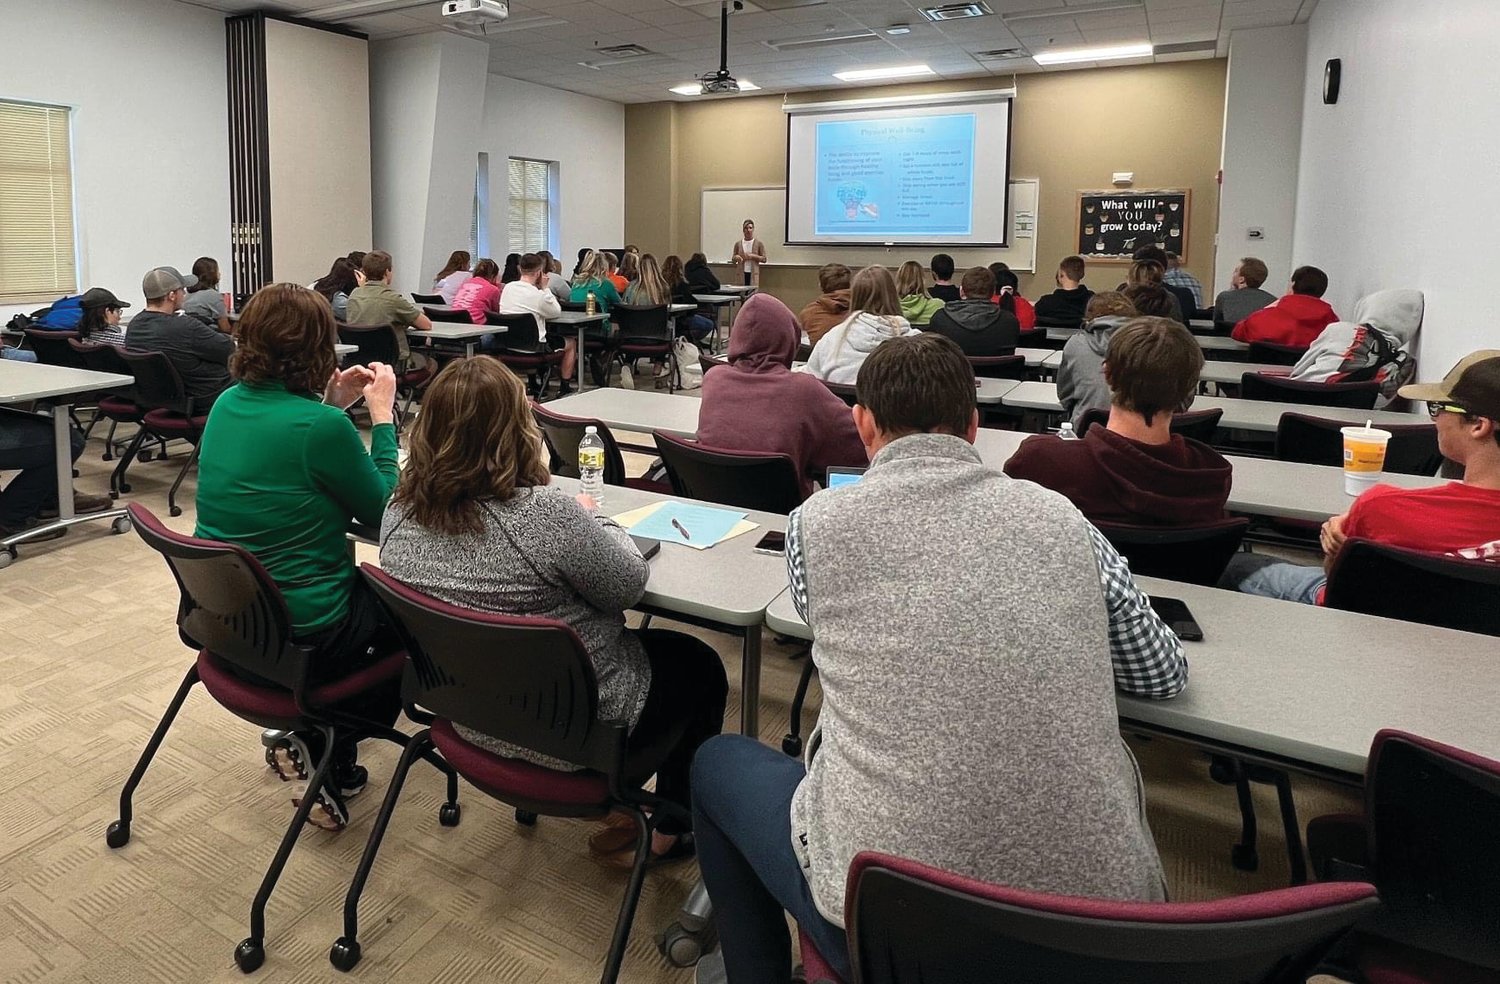 West Central Indiana Career and Technical Education cooperative offered a series of sessions May 23-26 geared towards preparing students for life after high school at Ivy Tech Community College Crawfordsville.